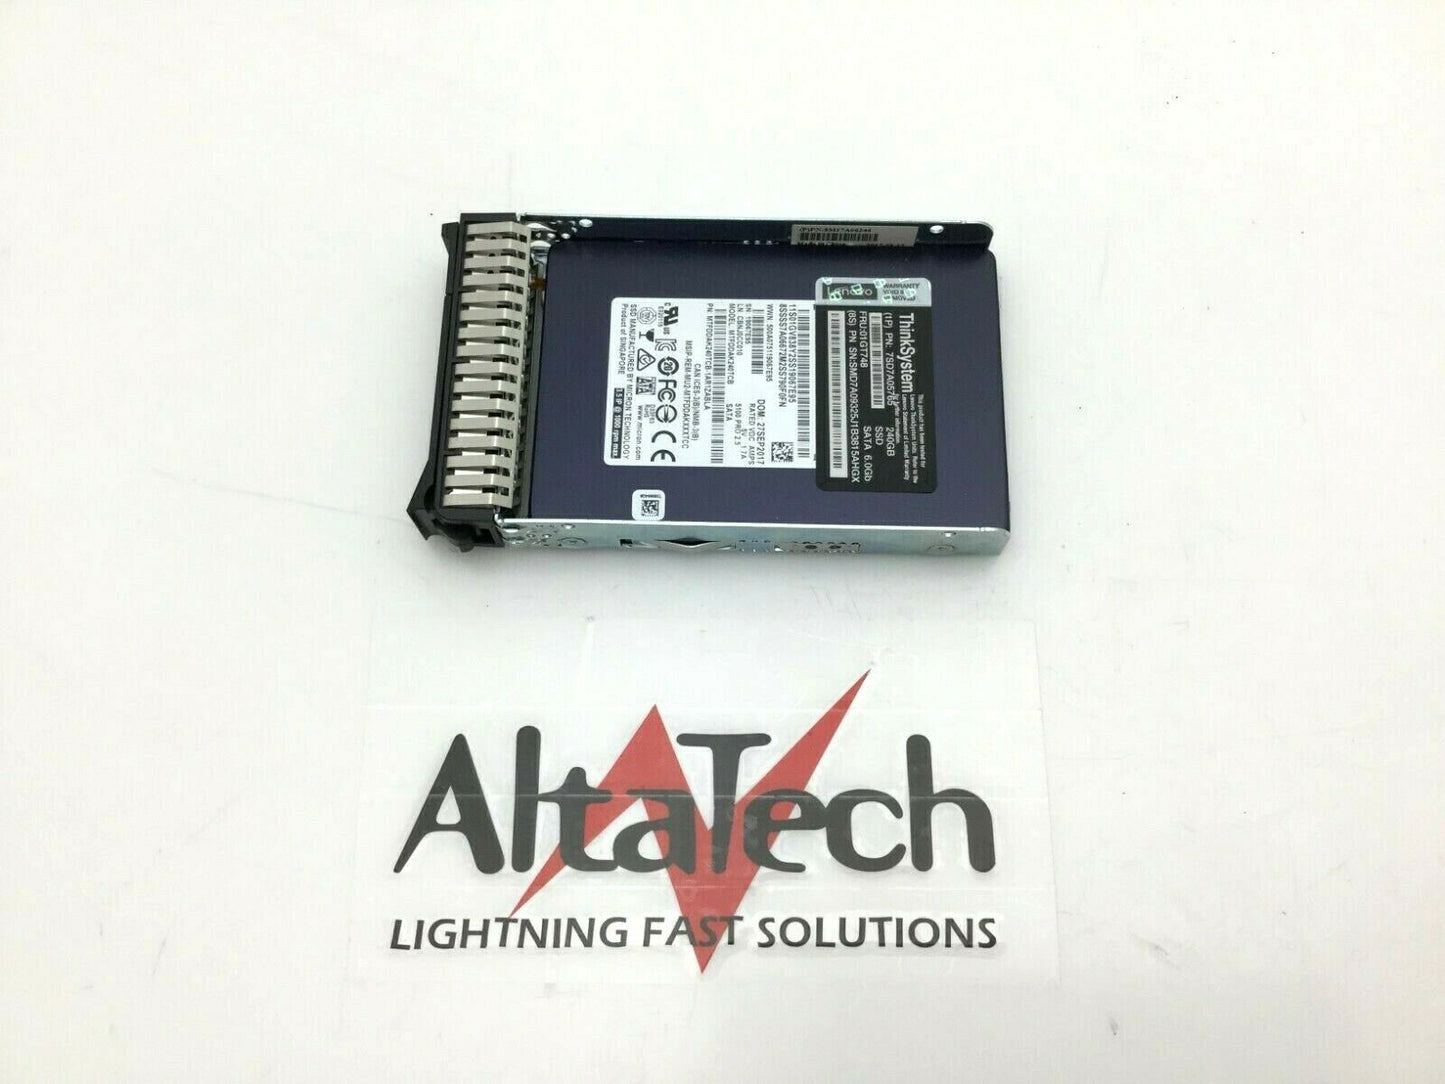 Lenovo 01GT748 240 GB 6Gbps 2.5-inch SATA Solid State Drive, Used